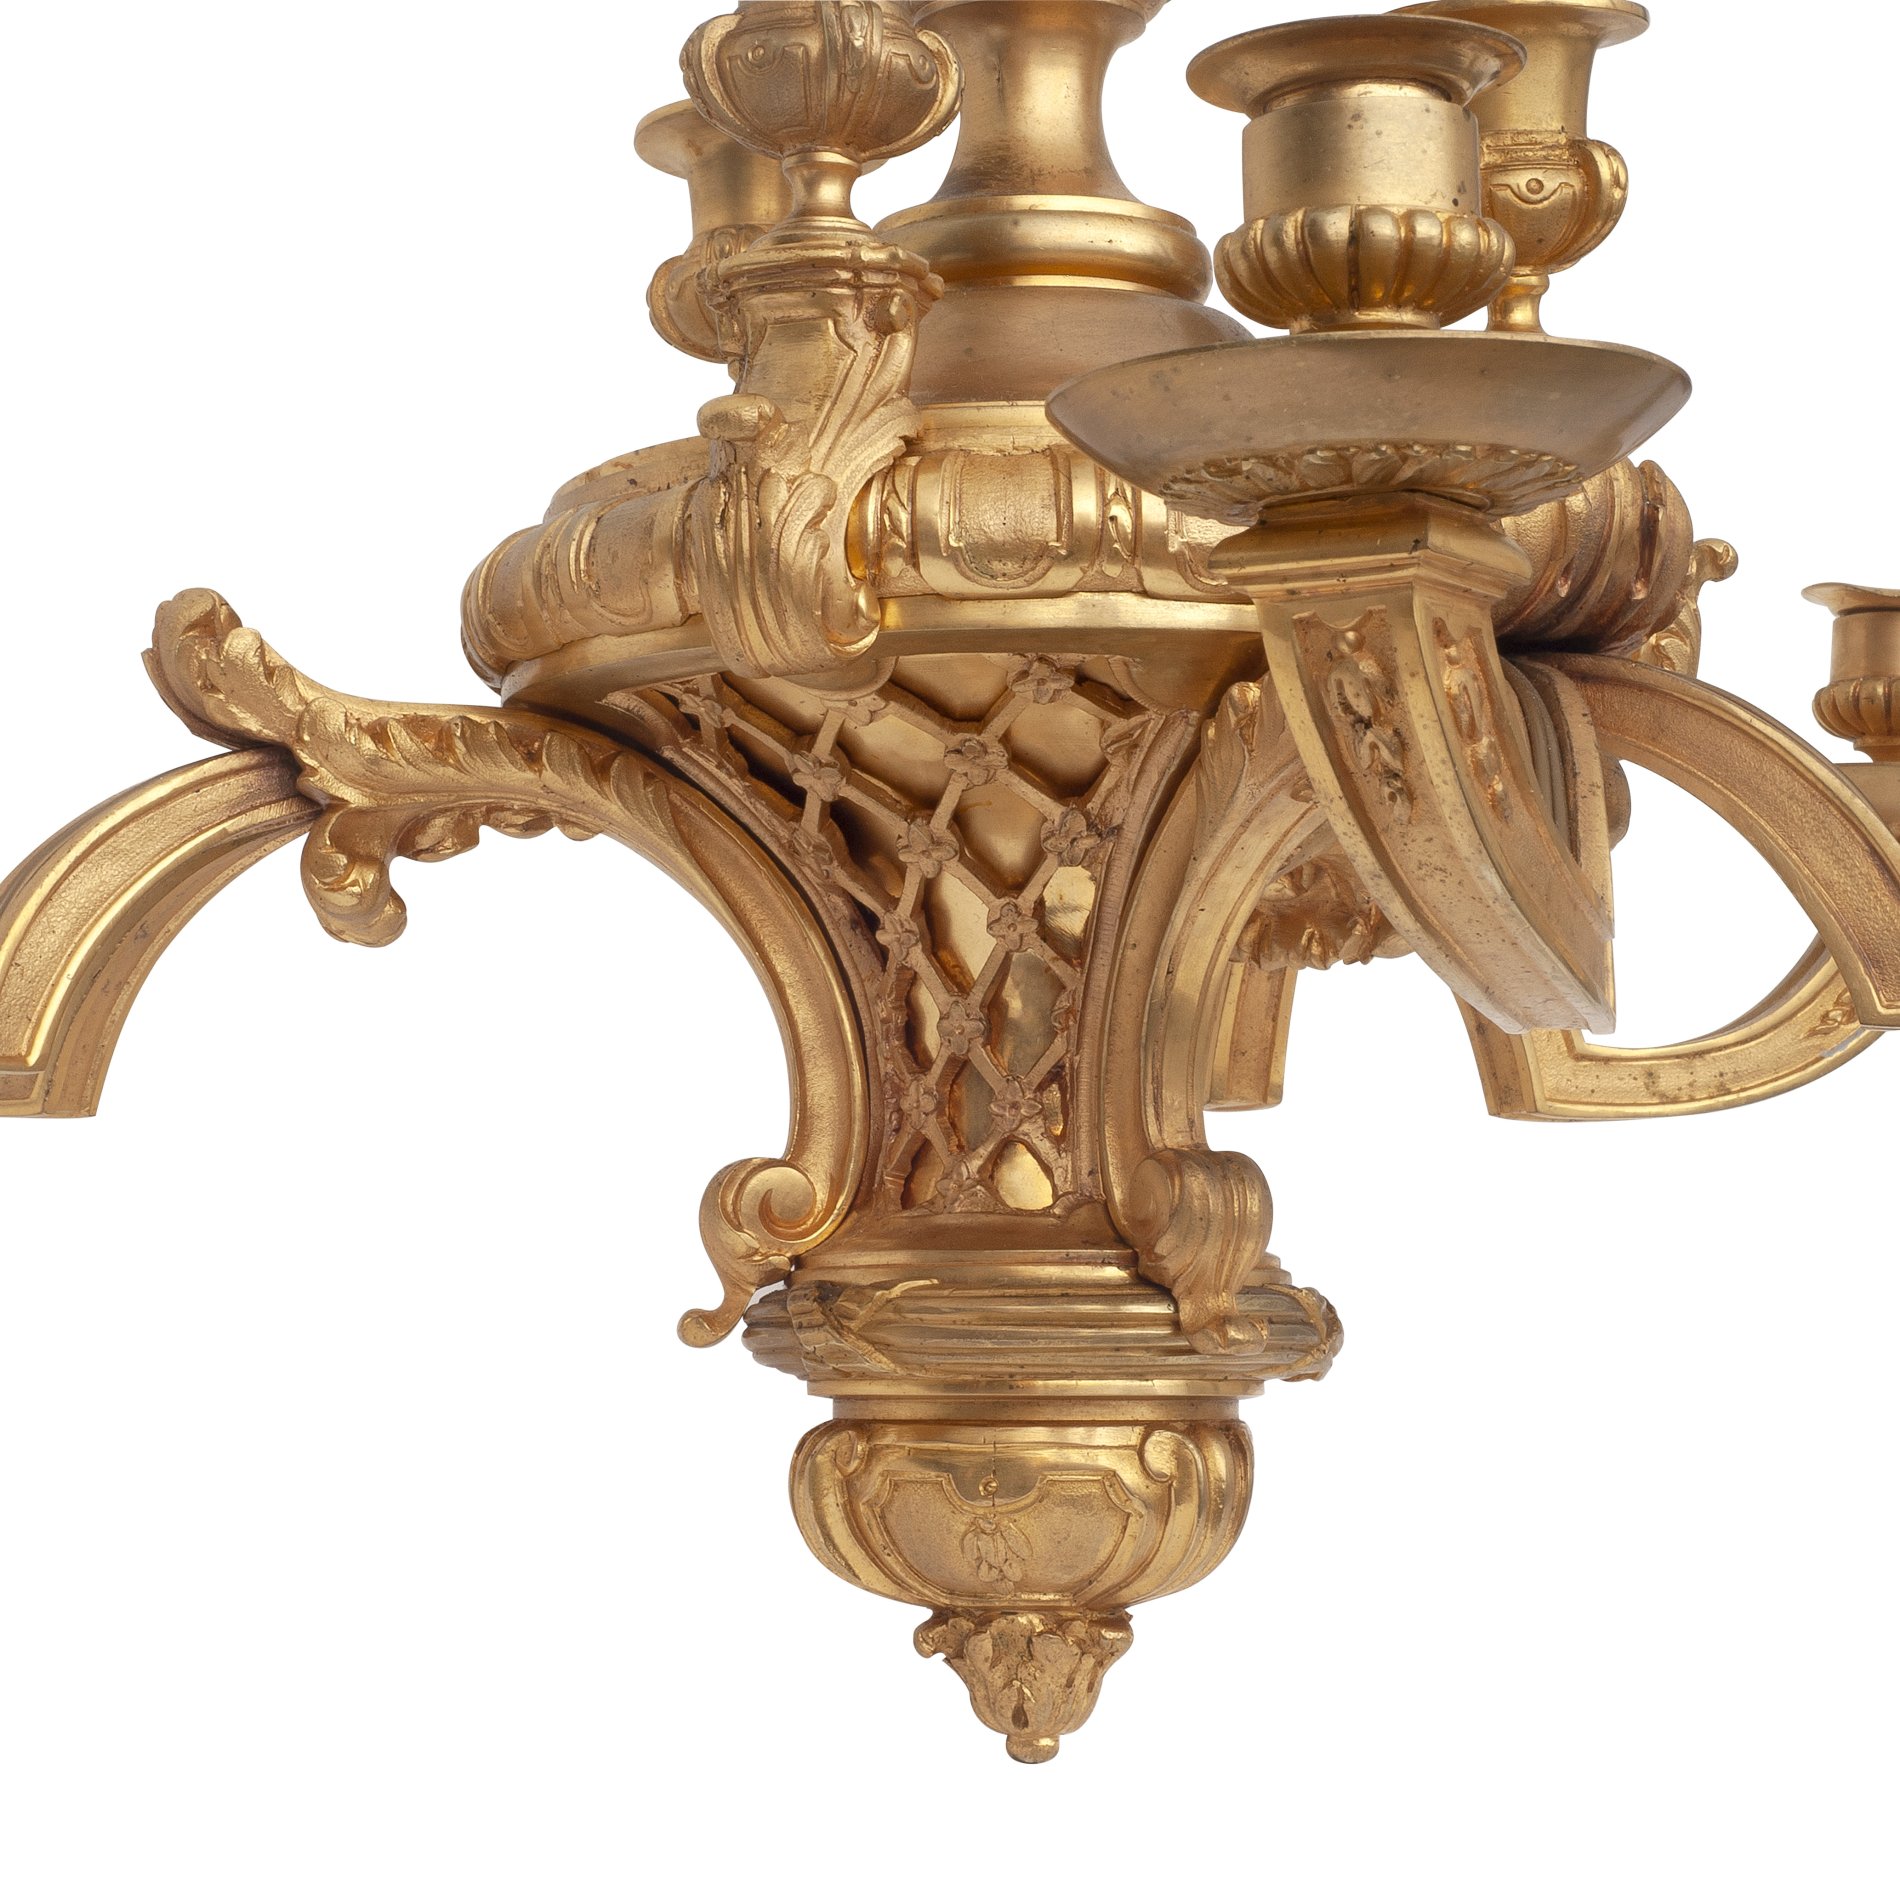 AN EARLY 20TH CENTURY 'BELLE EPOQUE' ORMOLU CHANDELIER - Image 2 of 2